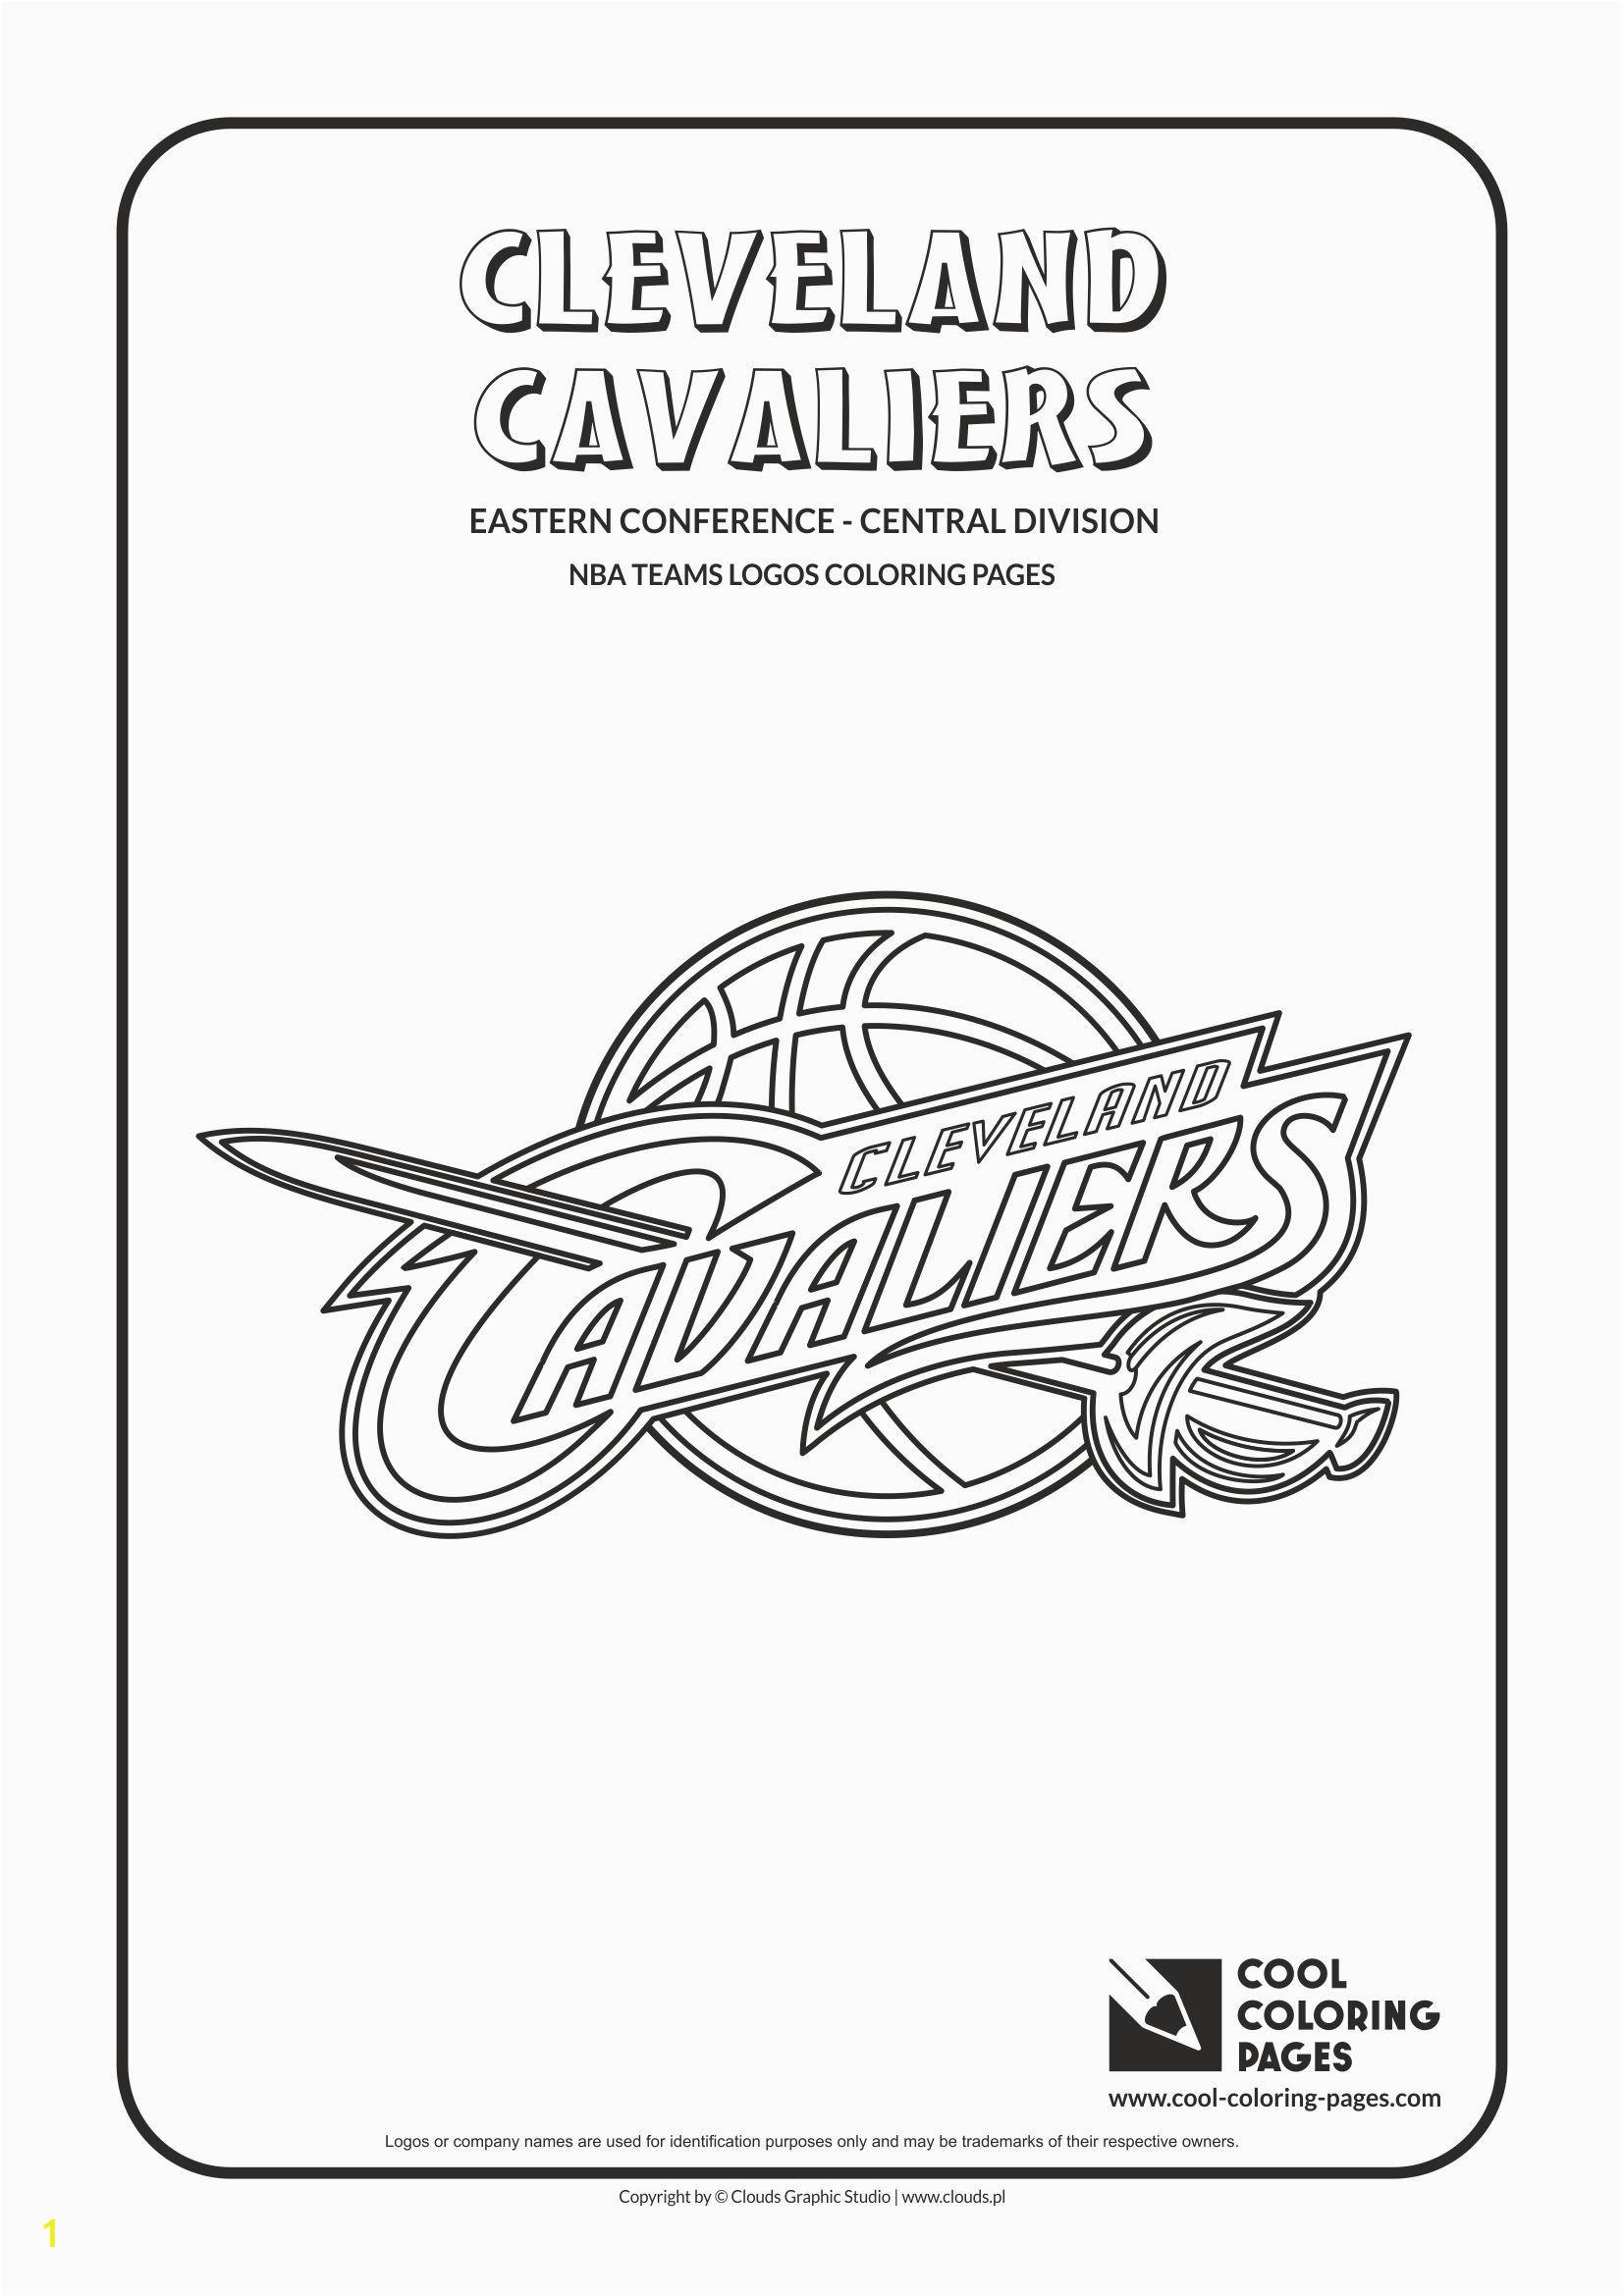 Cool Coloring Pages NBA Teams Logos Cleveland Cavaliers logo Coloring page…